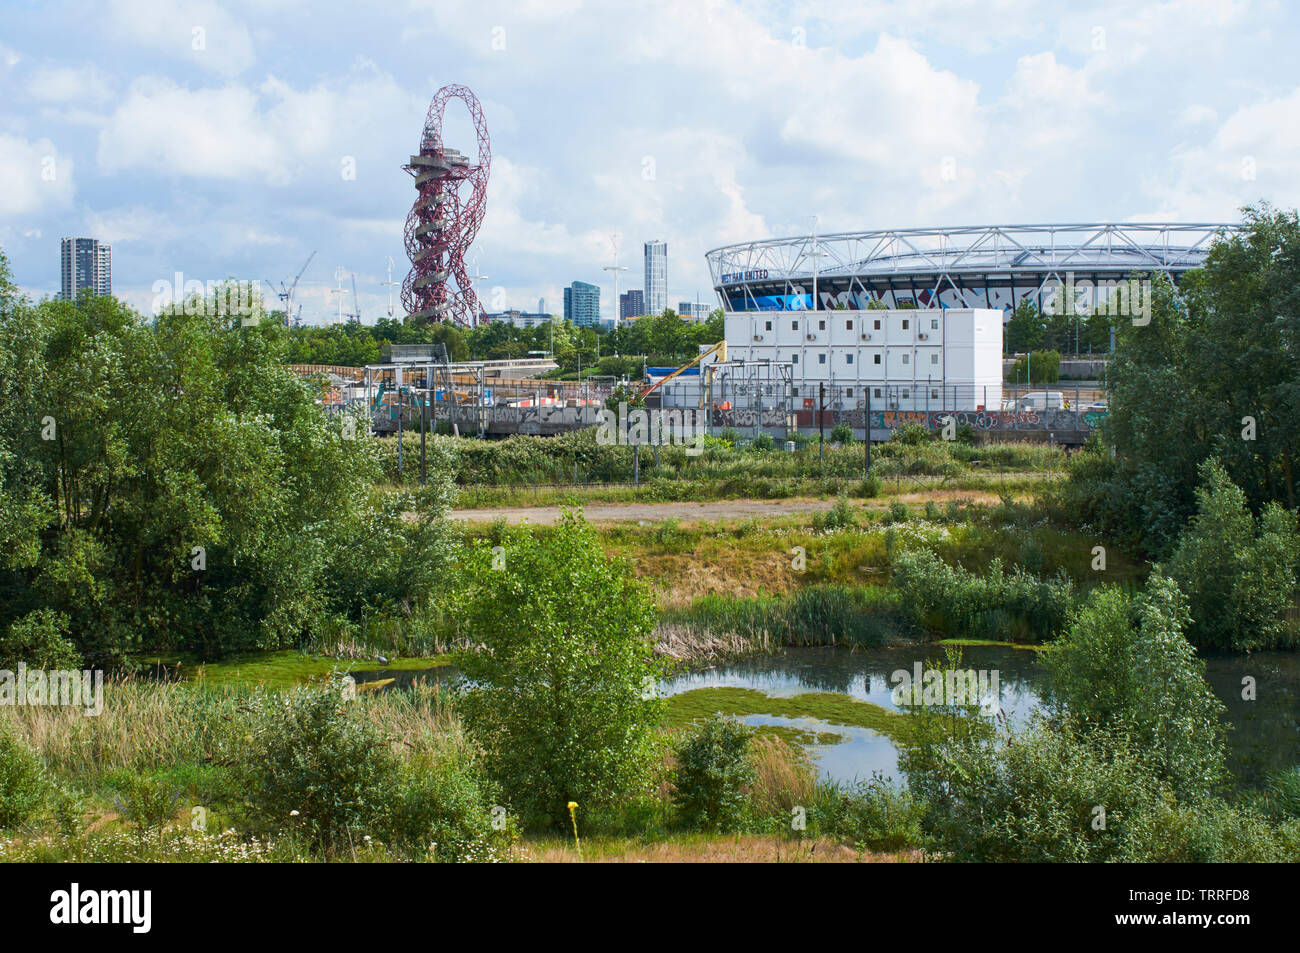 New construction near the London Stadium in the London Olympic Park, with marshland in the foreground Stock Photo